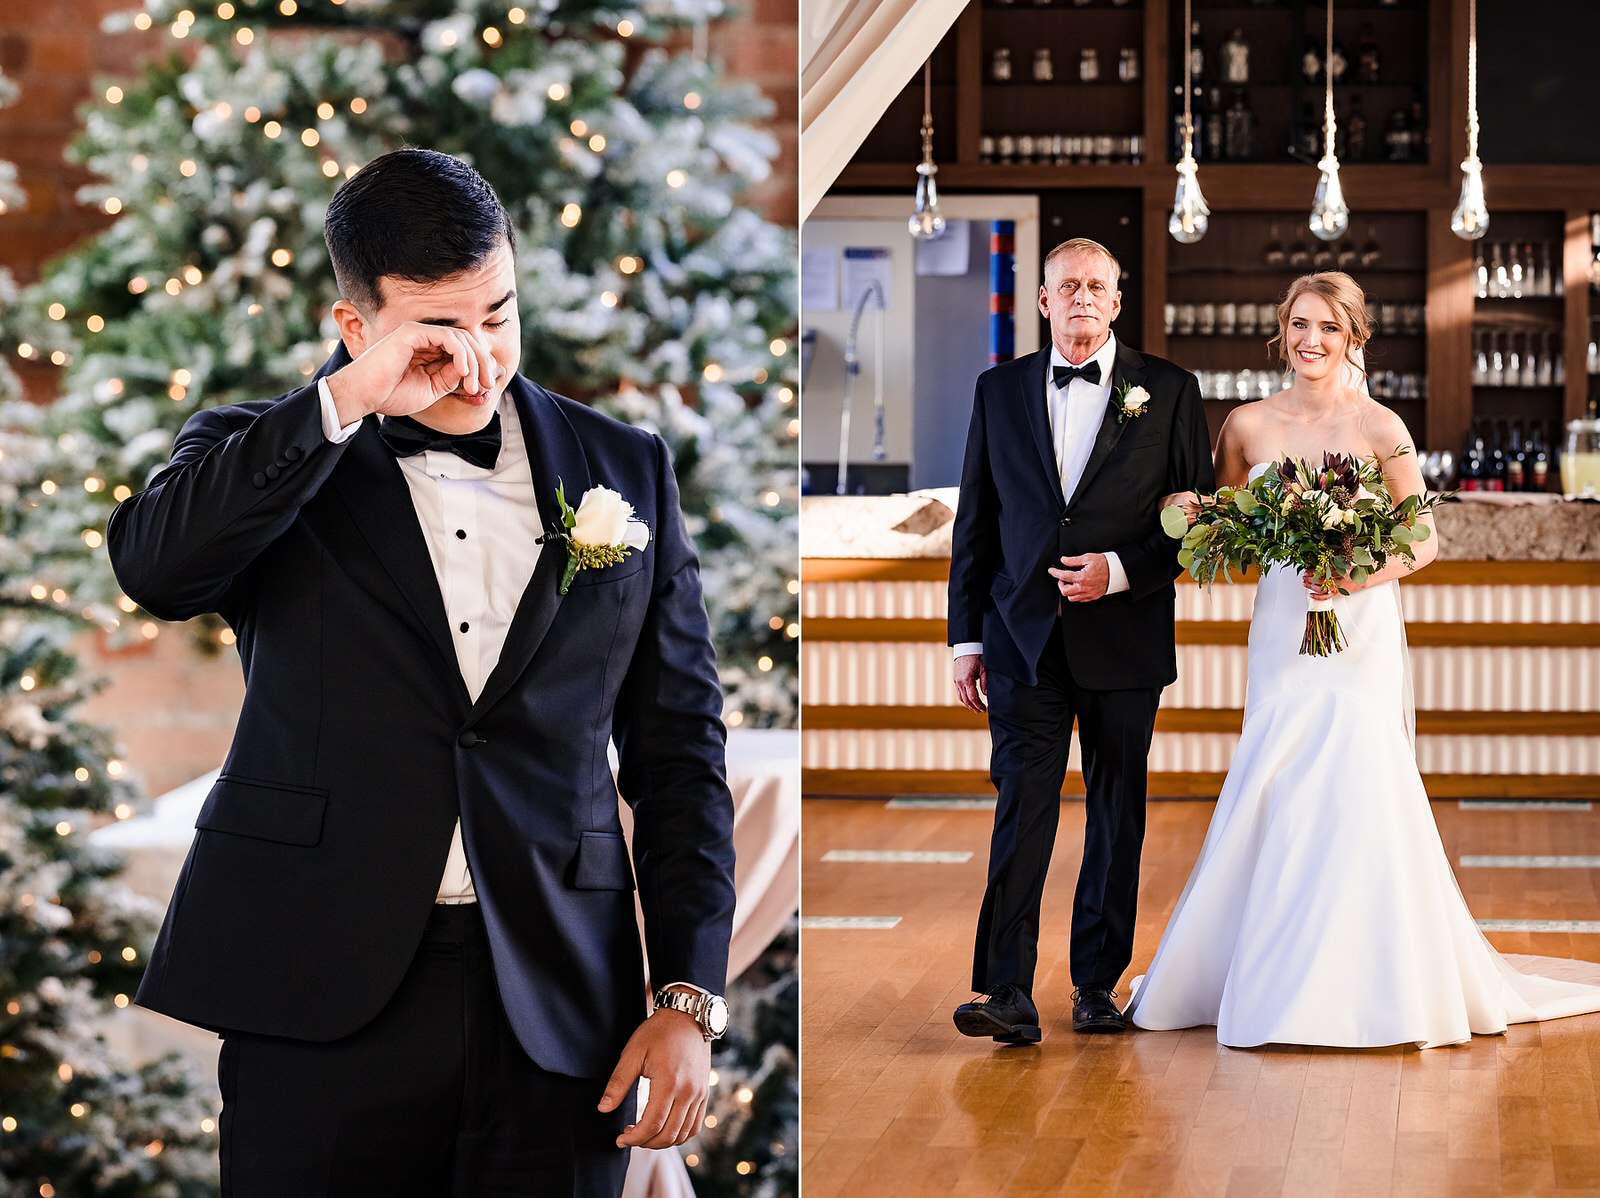 The groom's reaction at this Christmas wedding is so sweet